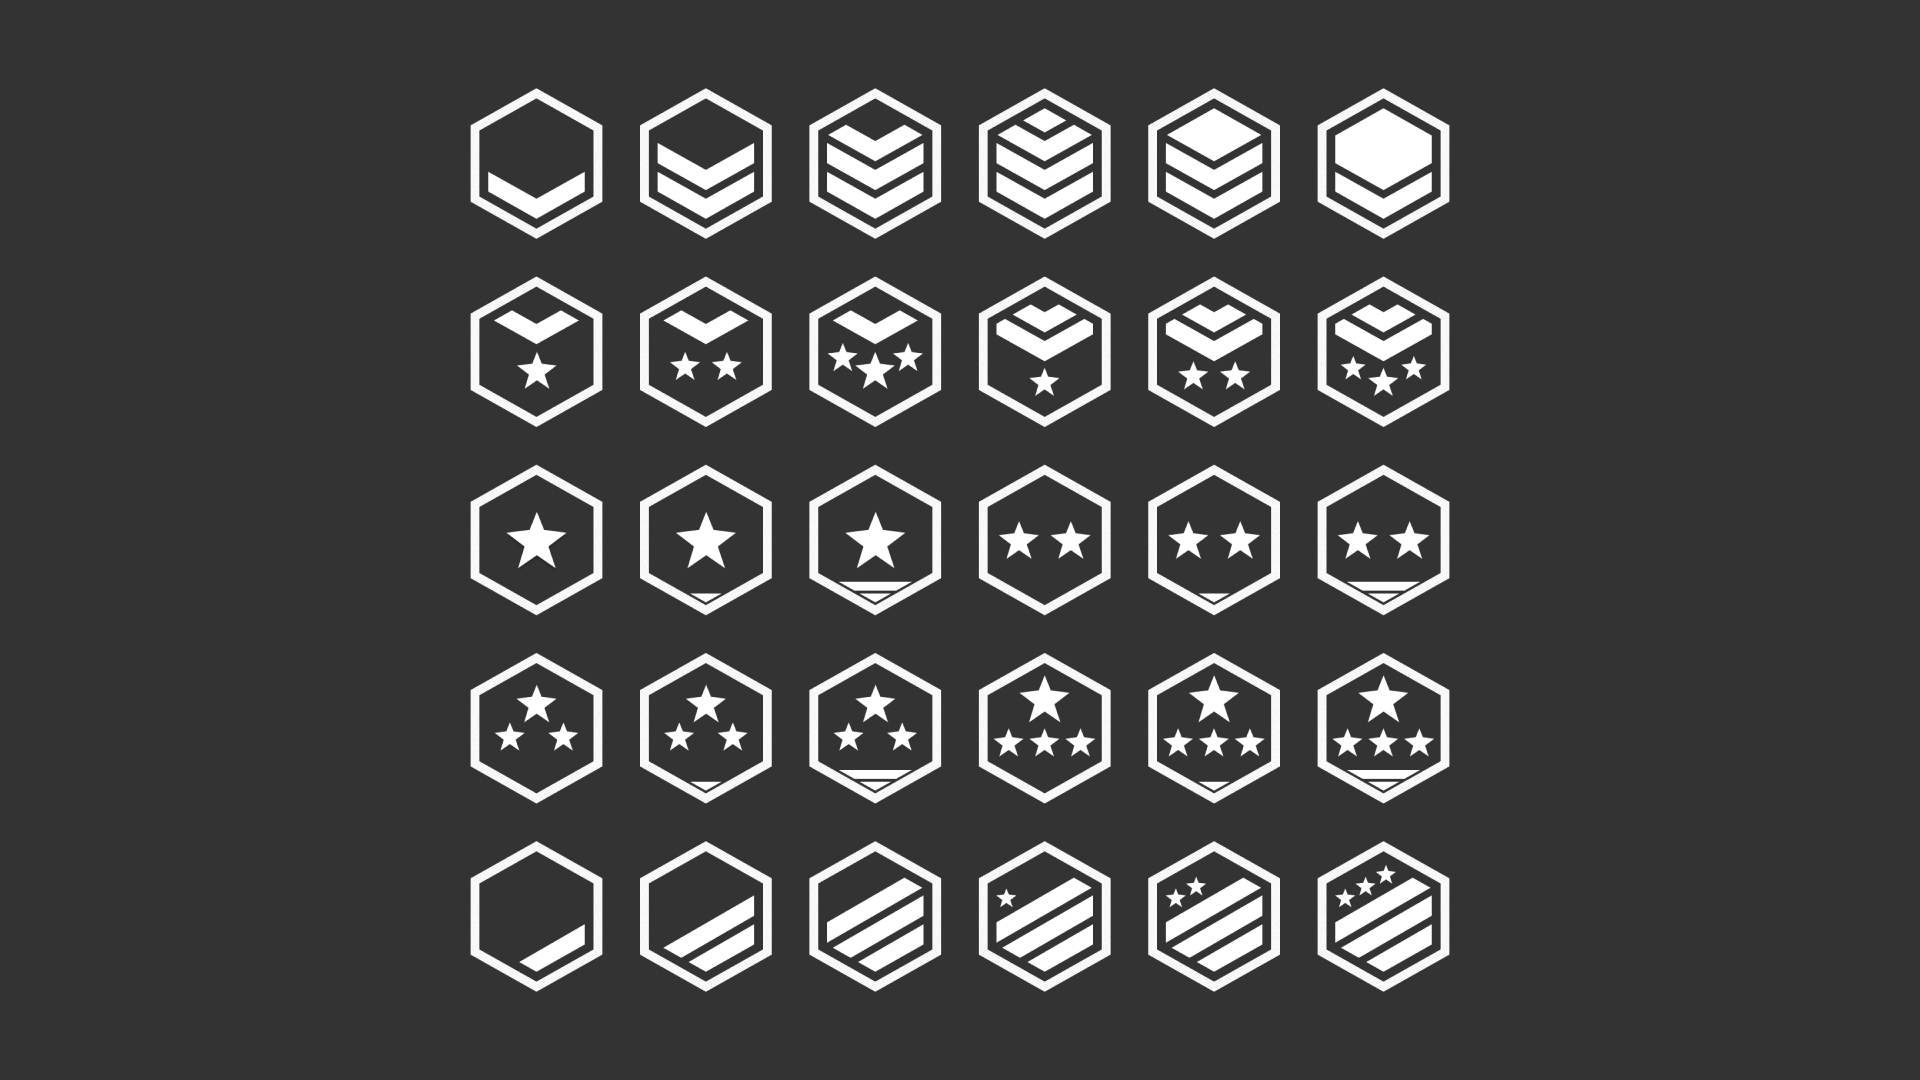 Fictional Military Ranks Icons Set by Warstellar Interactive